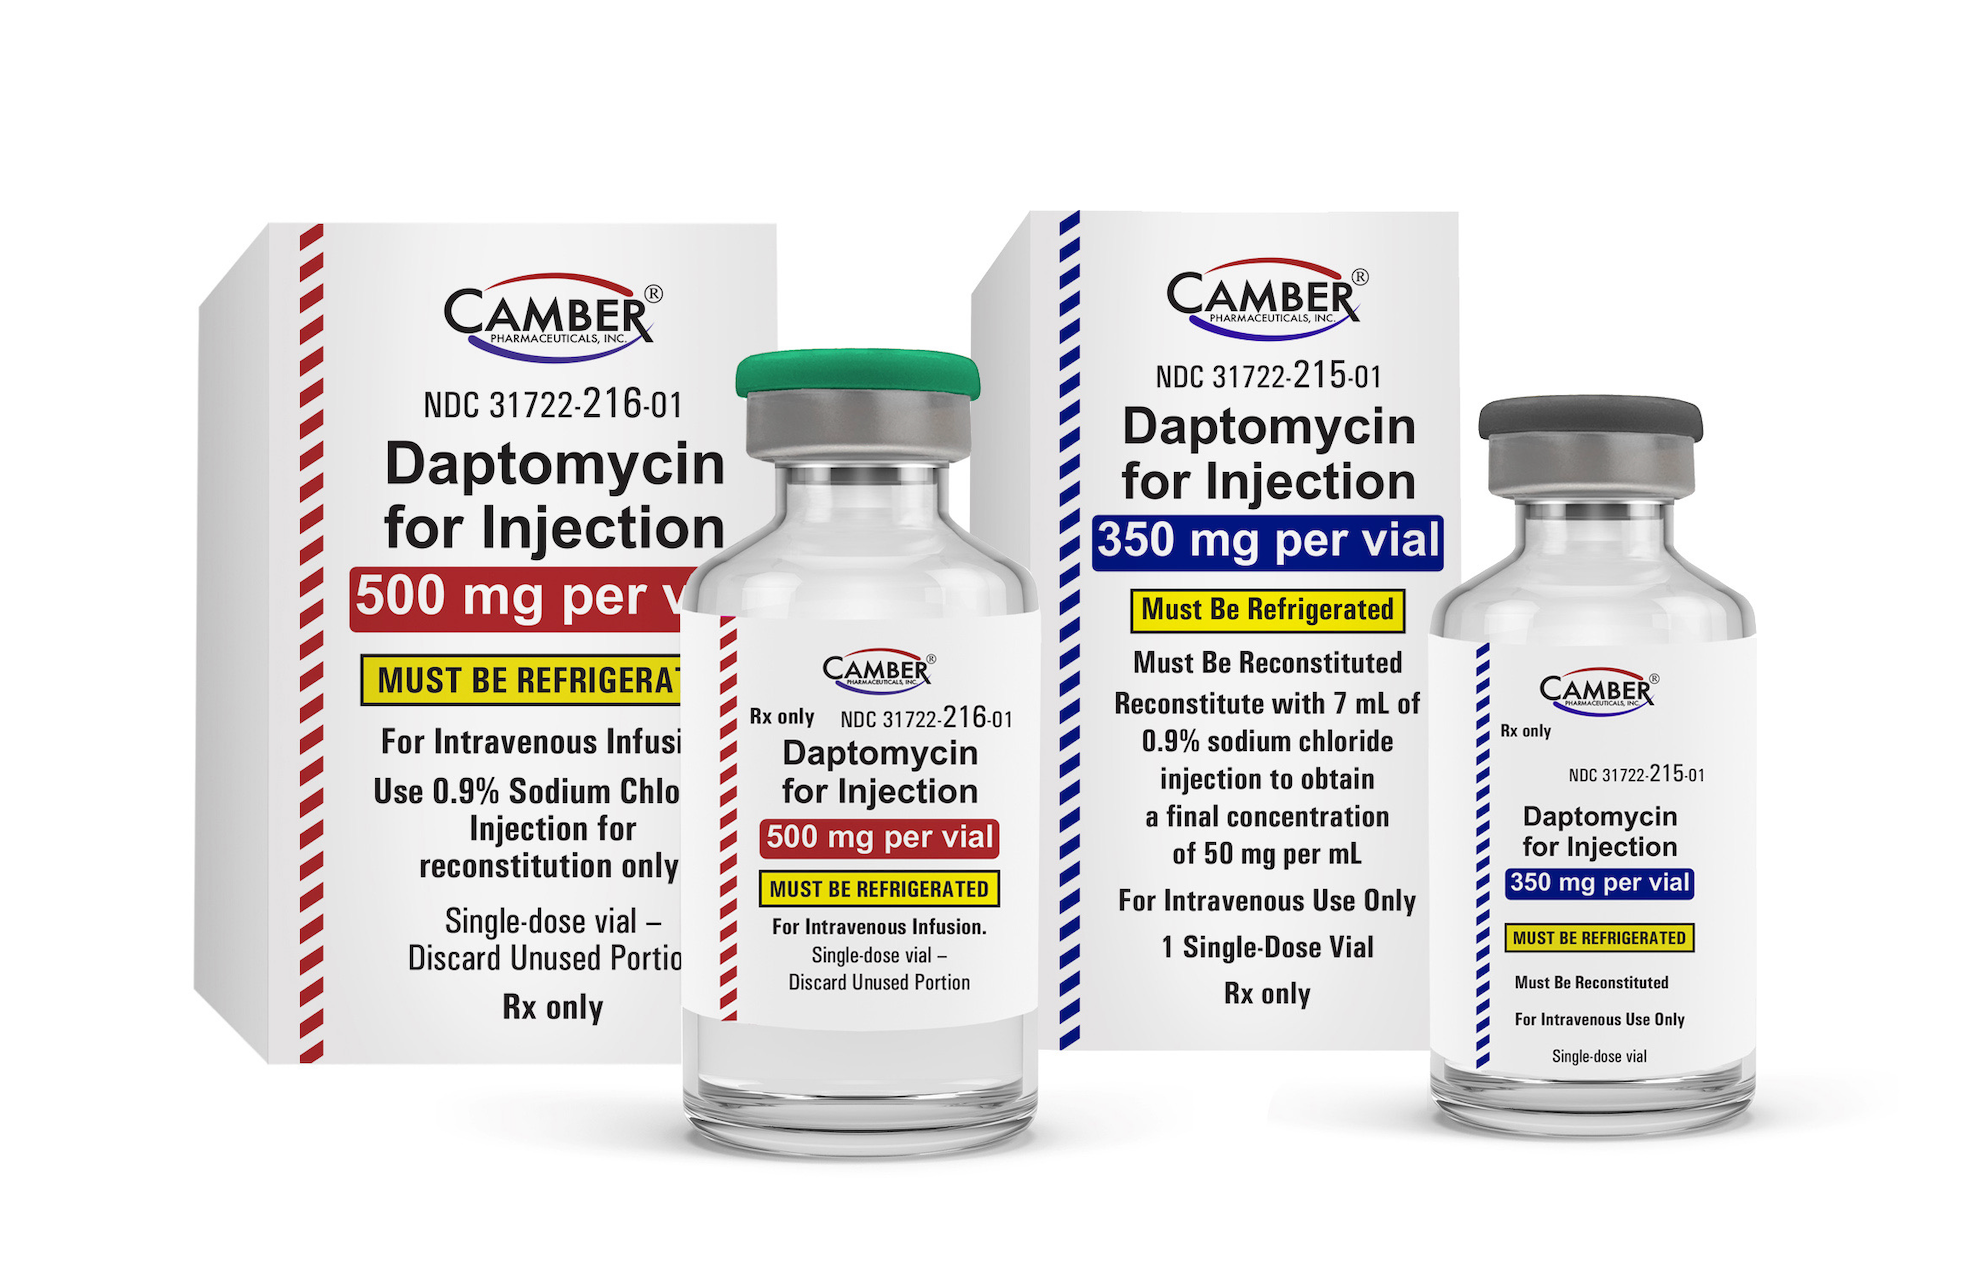 Camber Pharmaceuticals Launches Generic Daptomycin for Injection and Generic Cubicin